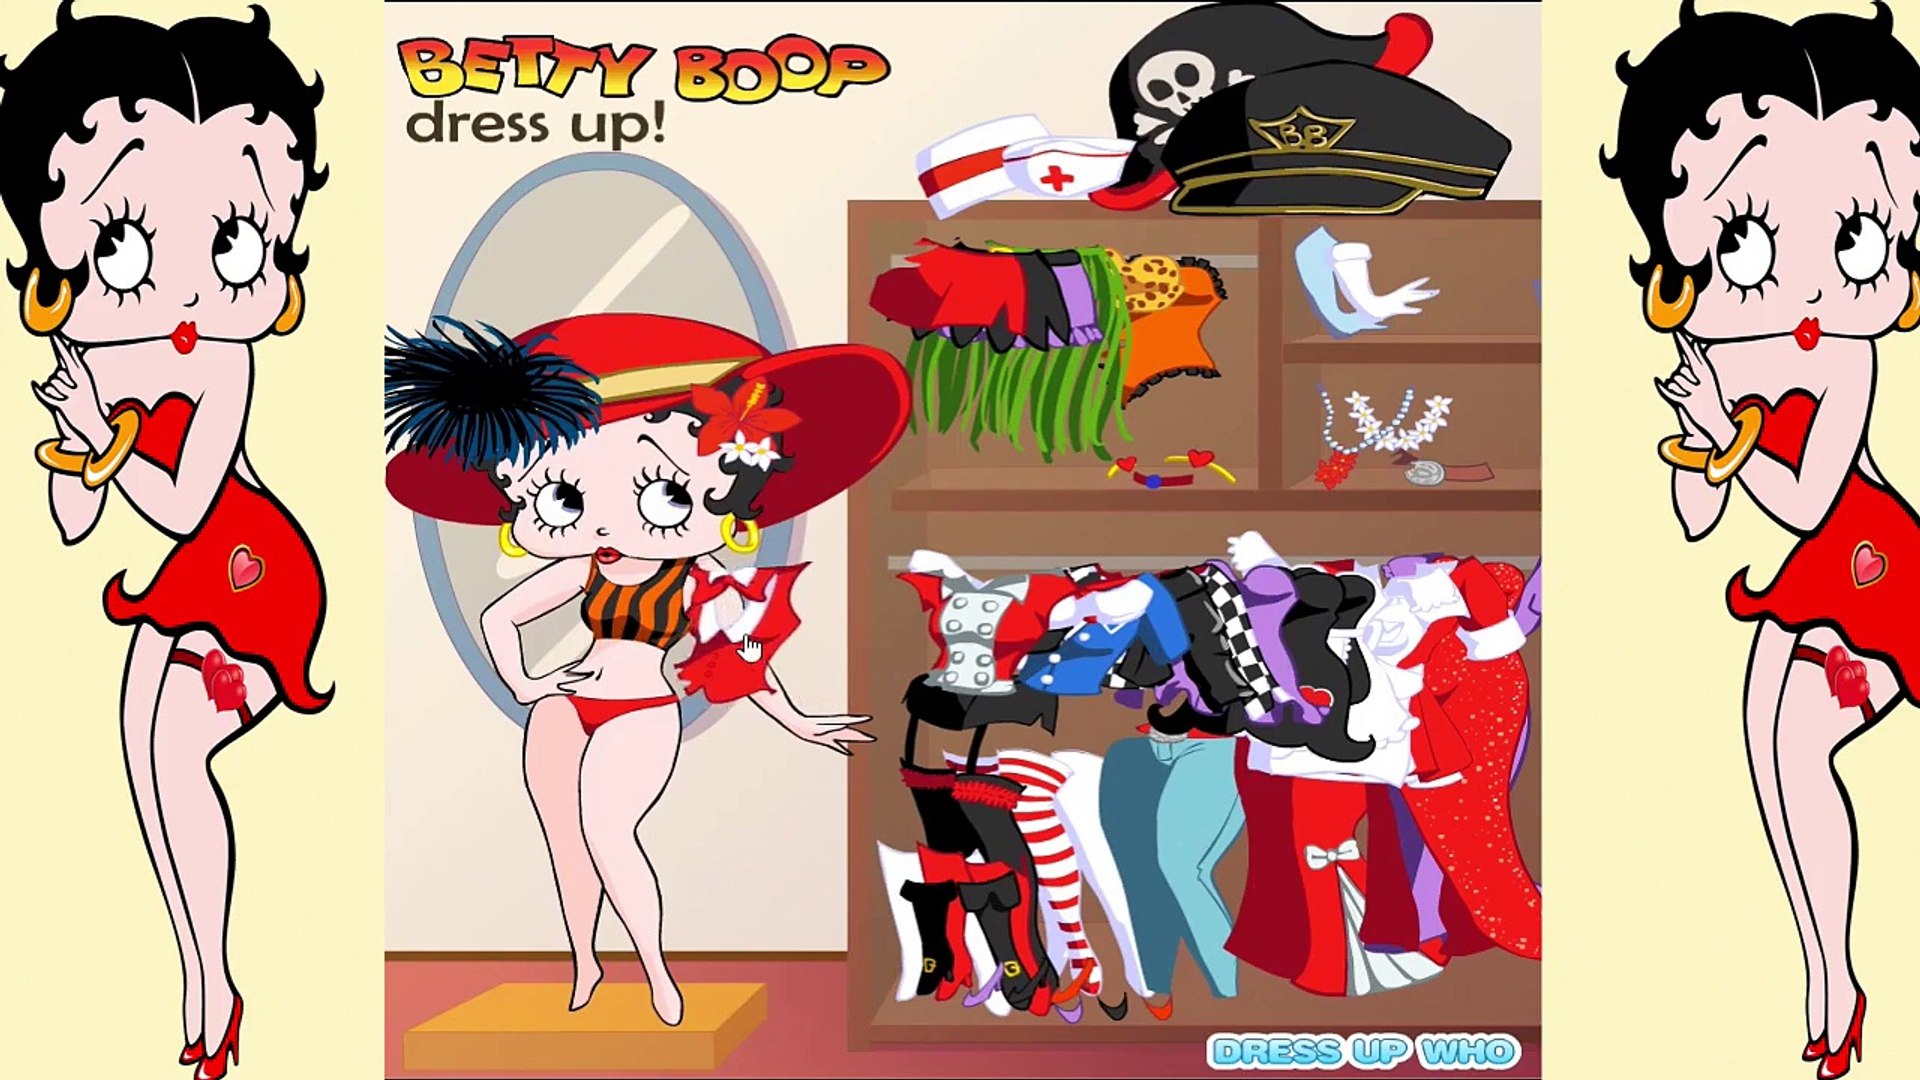 Why was betty boop banned